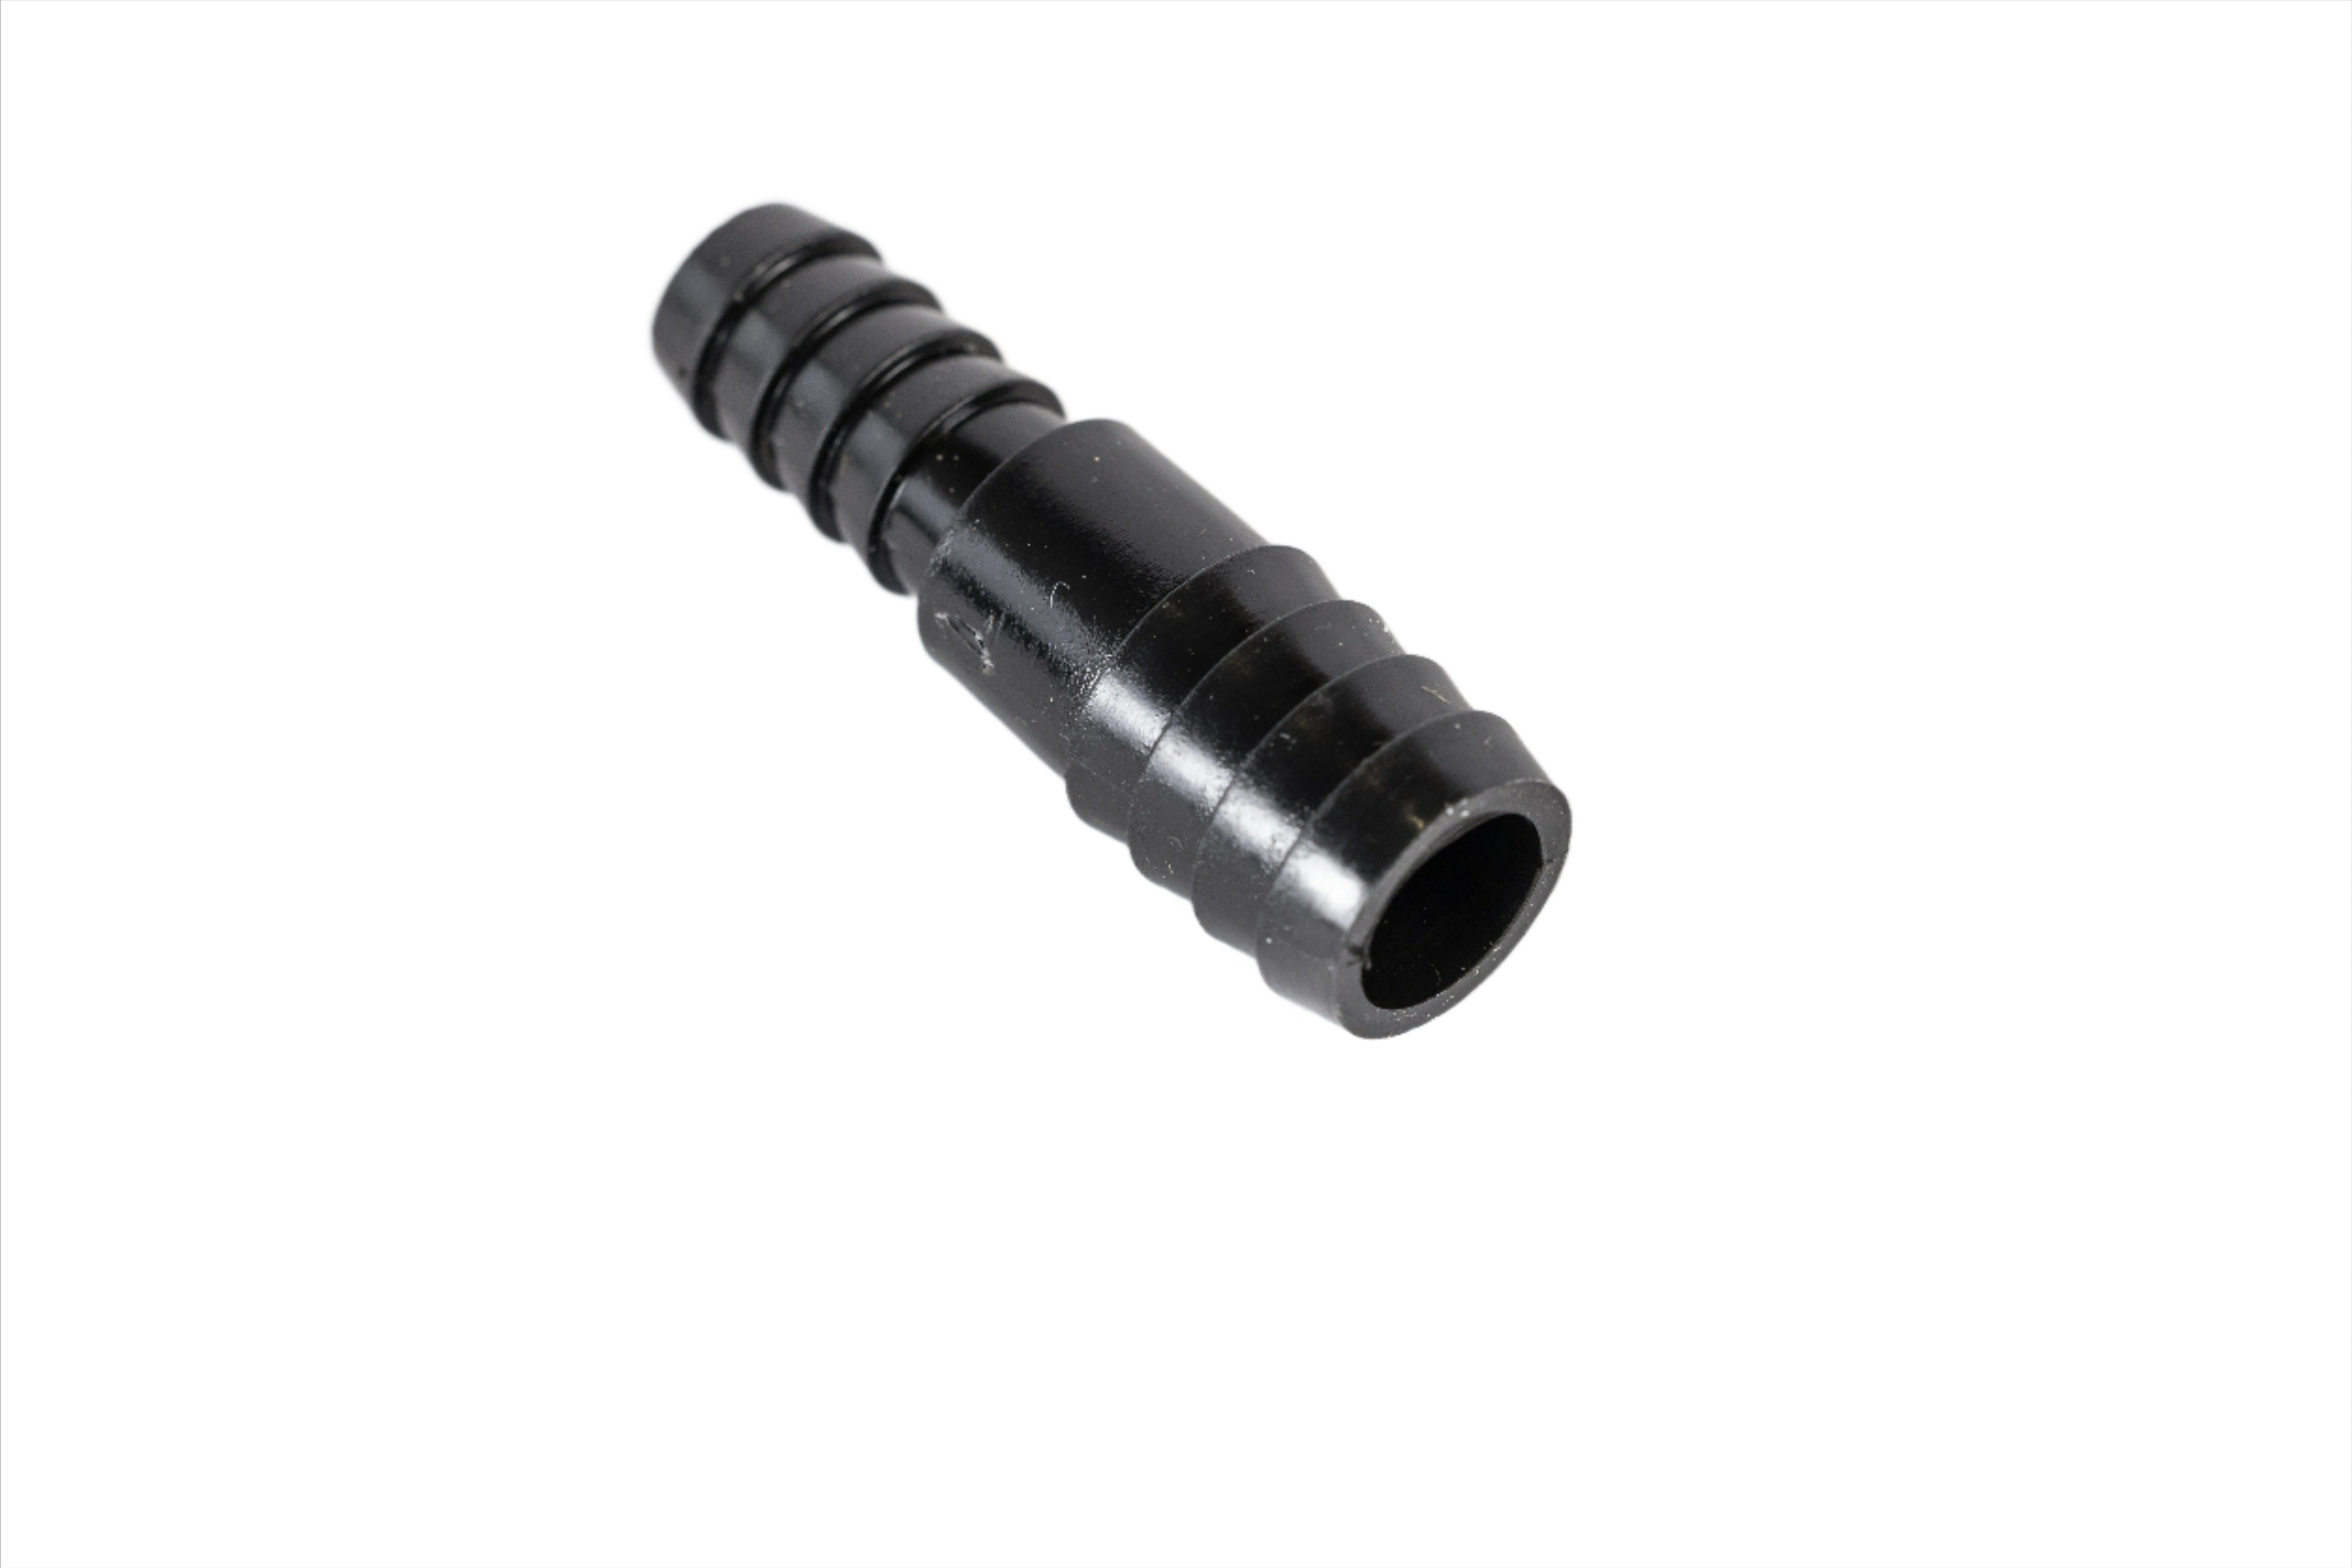 Condensate Fitting Drain Step Fitting 72R9030 Hose